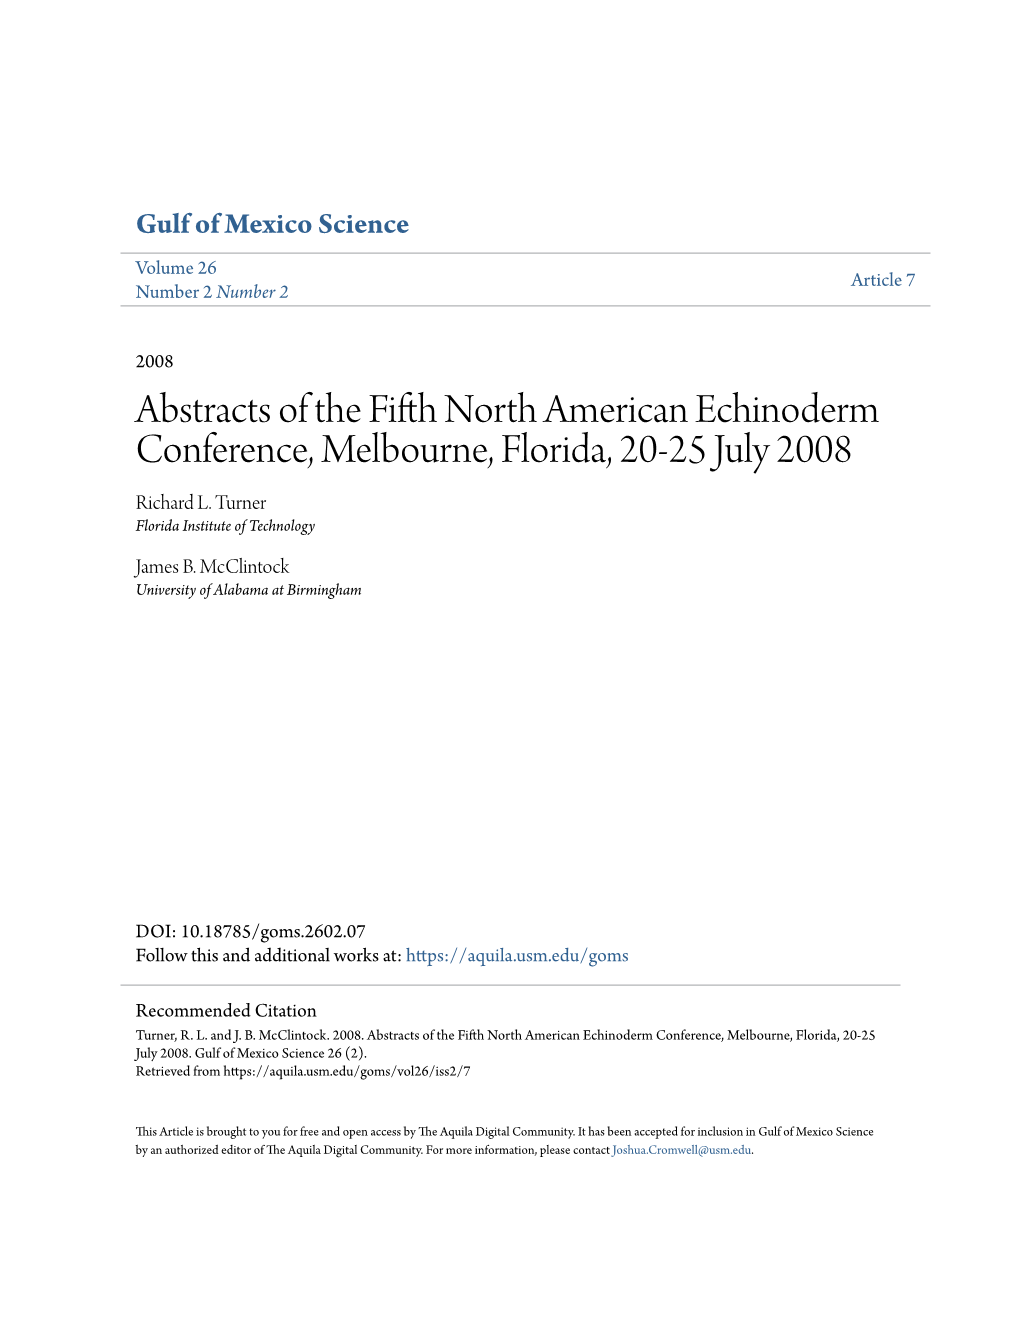 Abstracts of the Fifth North American Echinoderm Conference, Melb